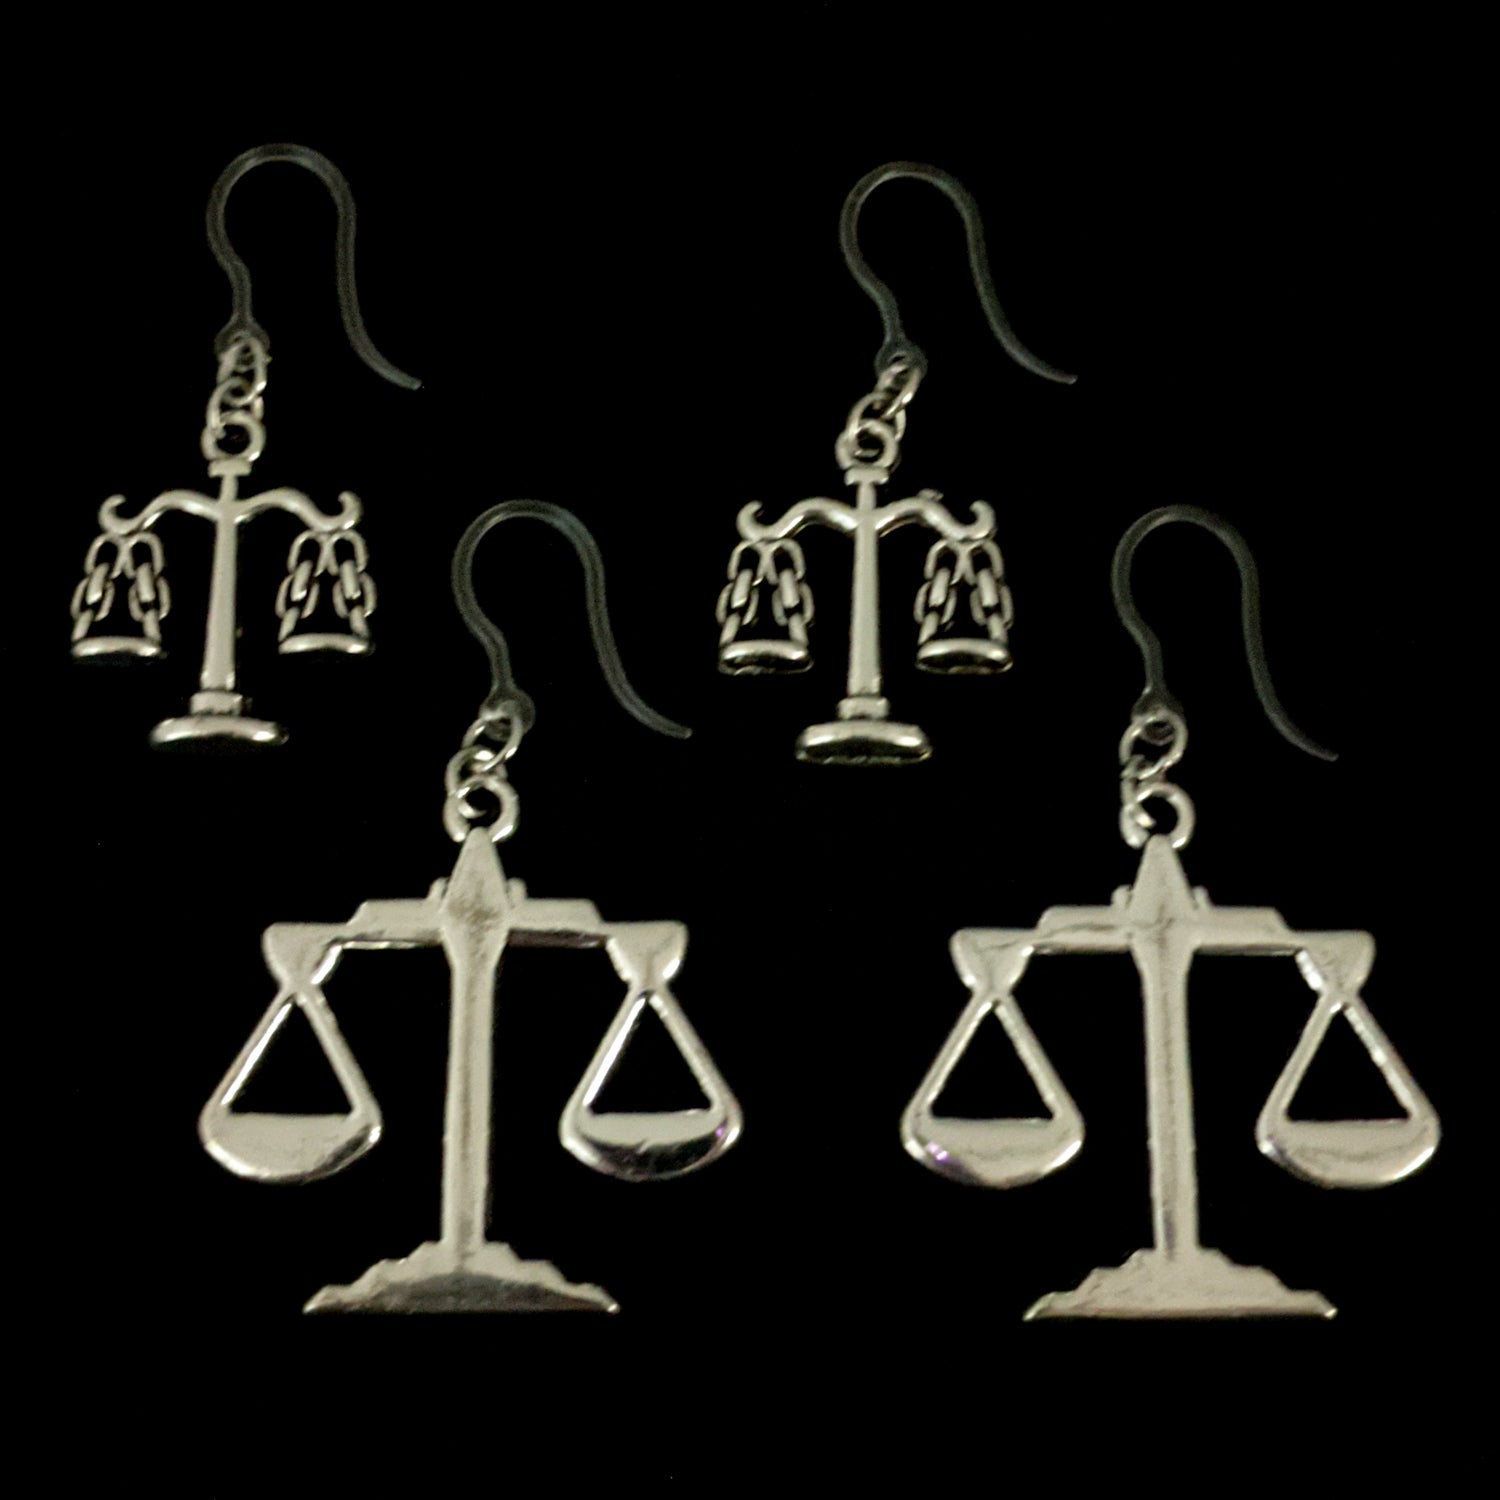 Scales of Justice Earrings (Dangles) - all sizes